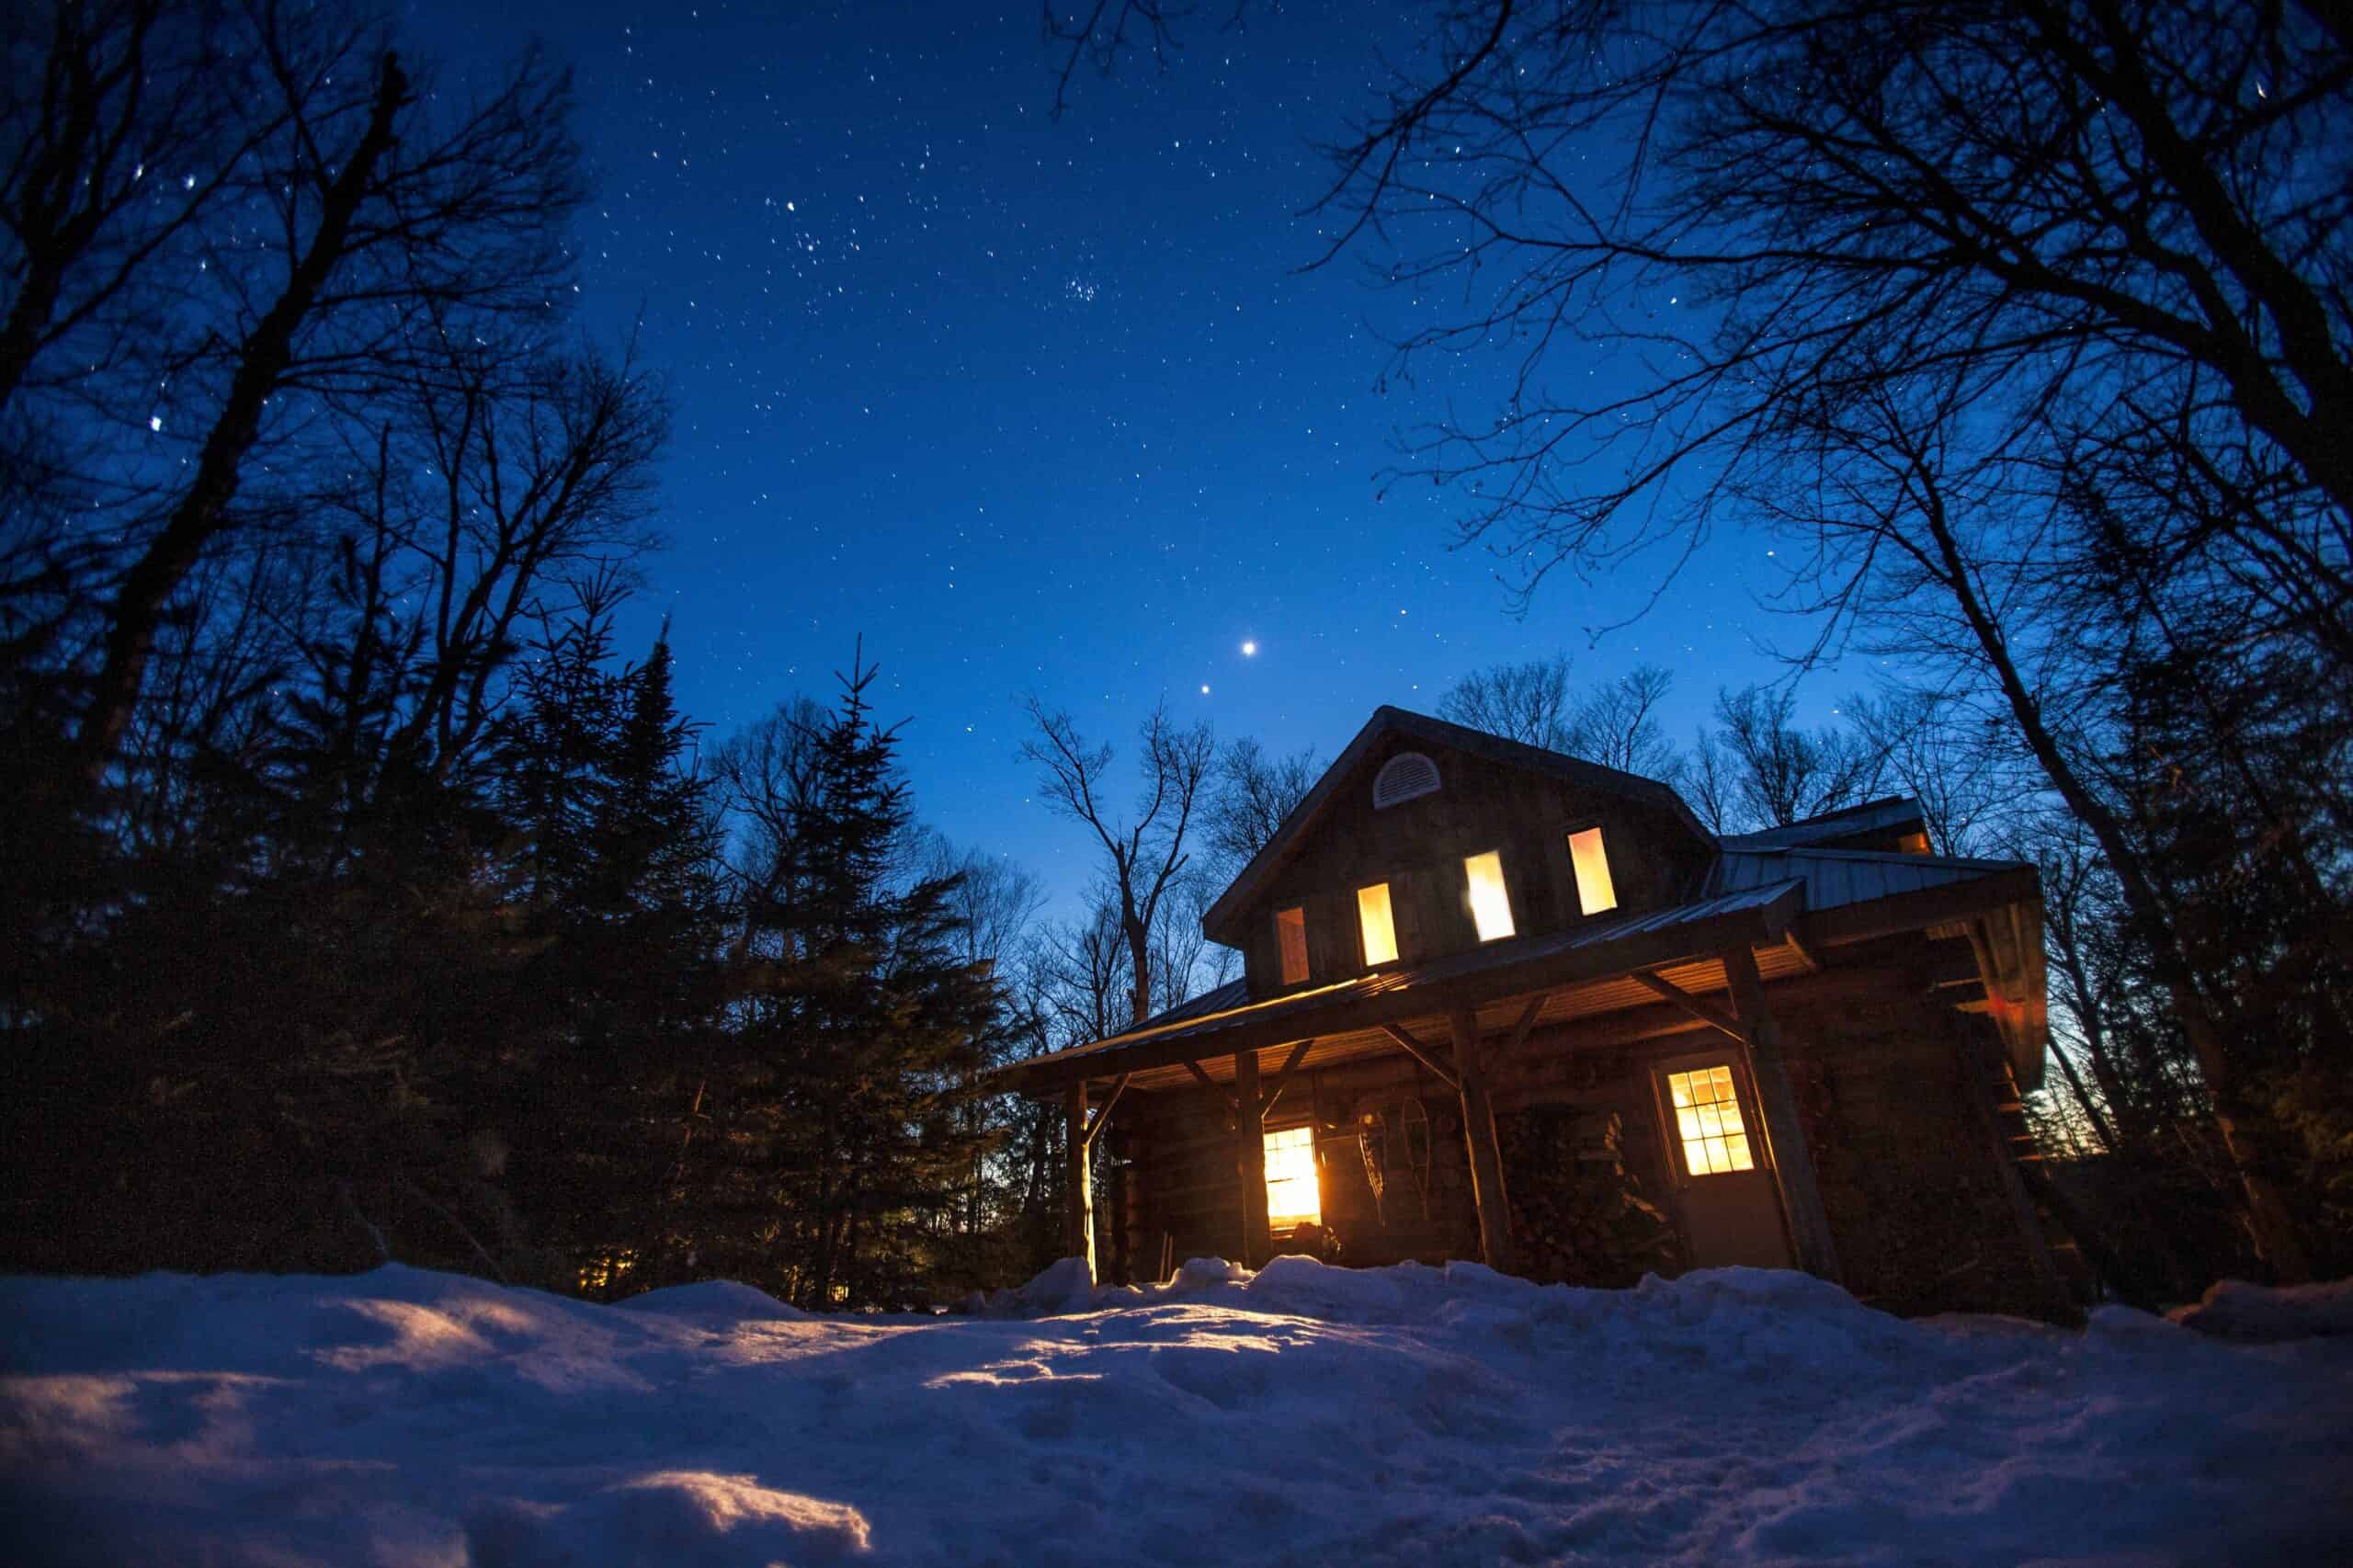 Algonquin Log Cabin in Winter surrounded with a sky full of stars